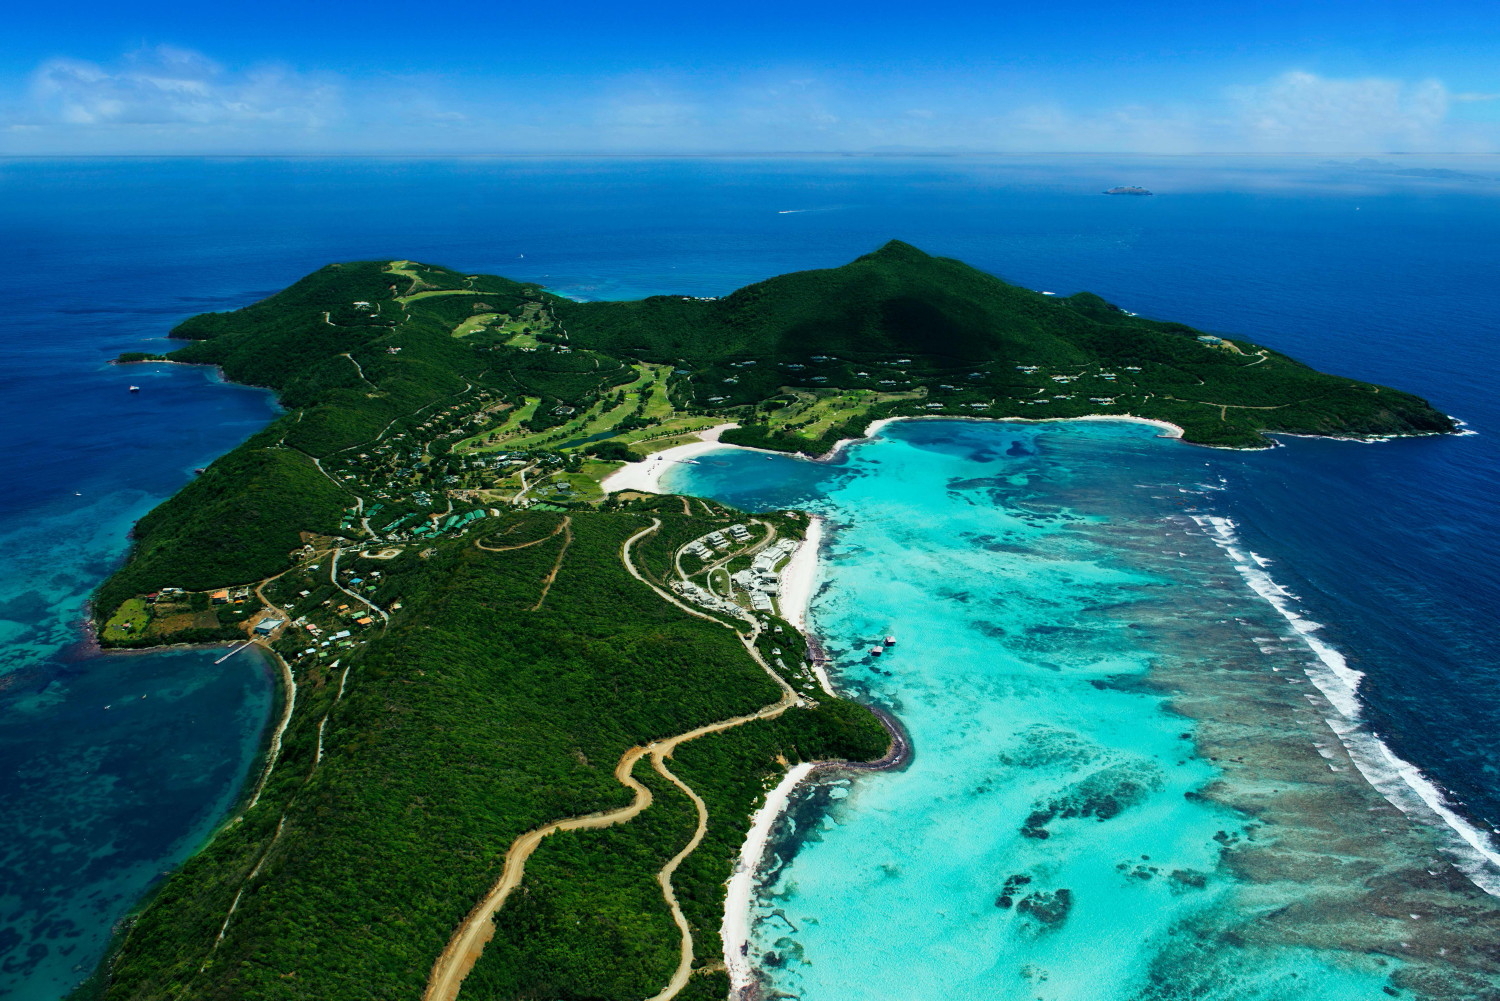 Mandarin Oriental is to rebrand and manage a luxury hotel on Canouan island in Saint Vincent and the Grenadines. Currently operating as the Pink Sands Club (formally Raffles), the resort is part of the Canouan estate and a member of The Leading Hotels of the World. Mandarin Oriental will rebrand the property as the Mandarin Oriental, Canouan on 1 November 2017. It will be the group’s first property in the Caribbean. Click to enlarge.